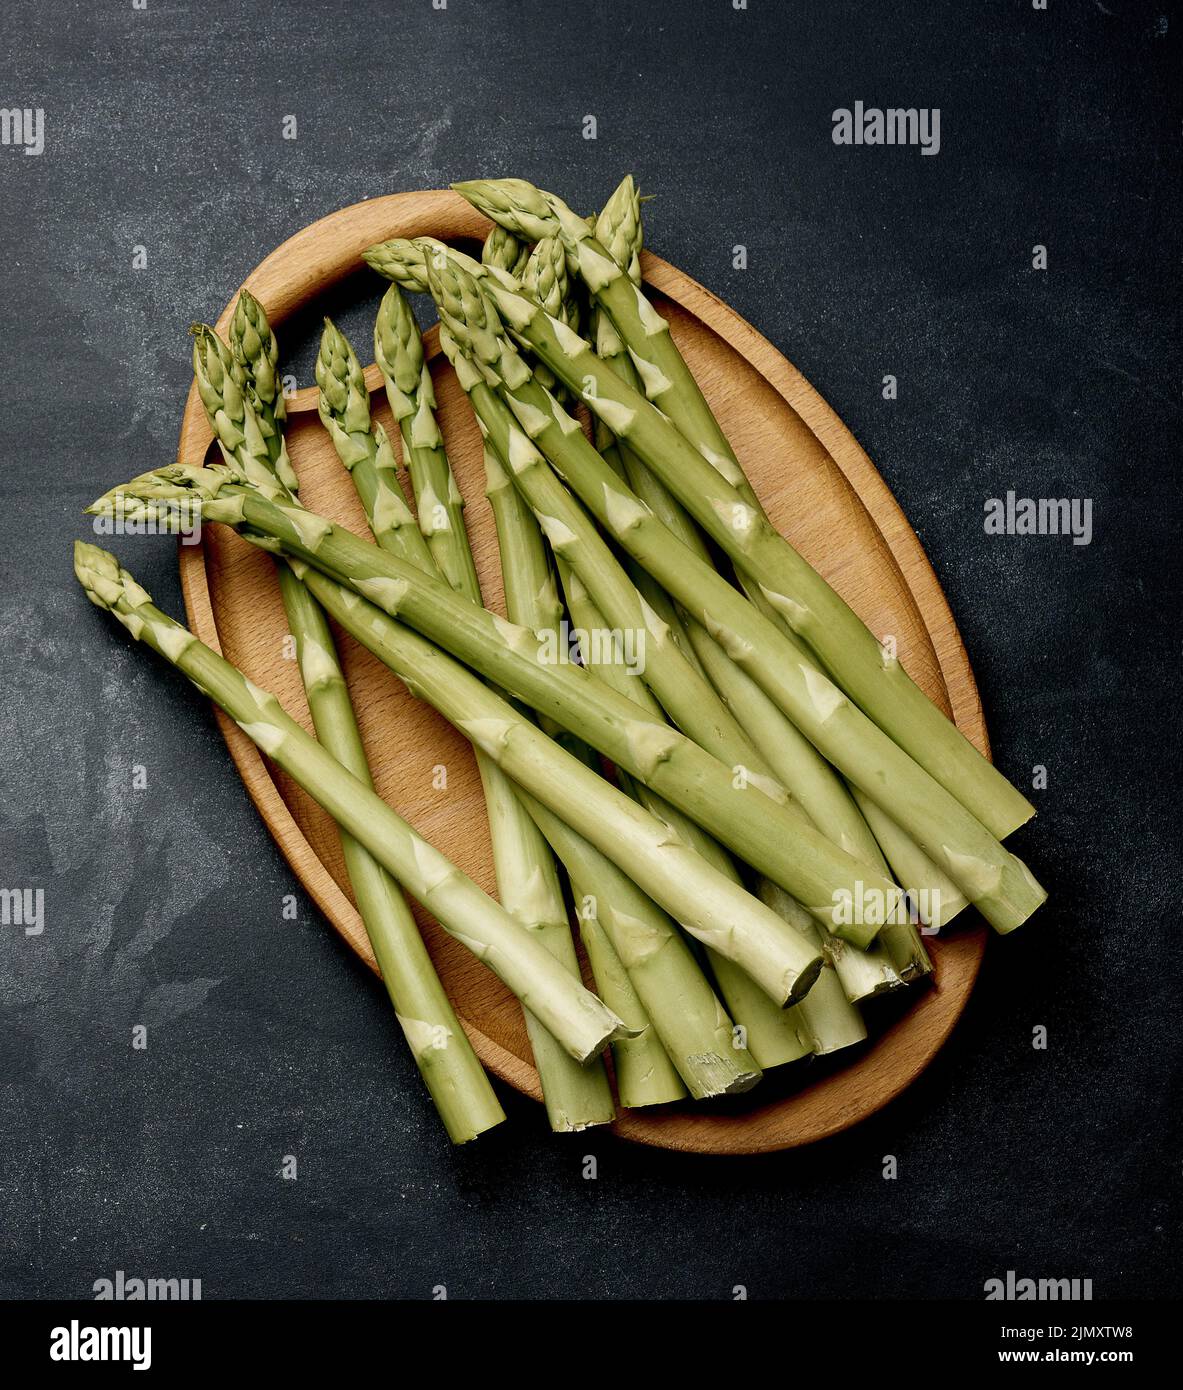 Bunch of fresh raw asparagus on a wooden black kitchen board, a healthy product Stock Photo